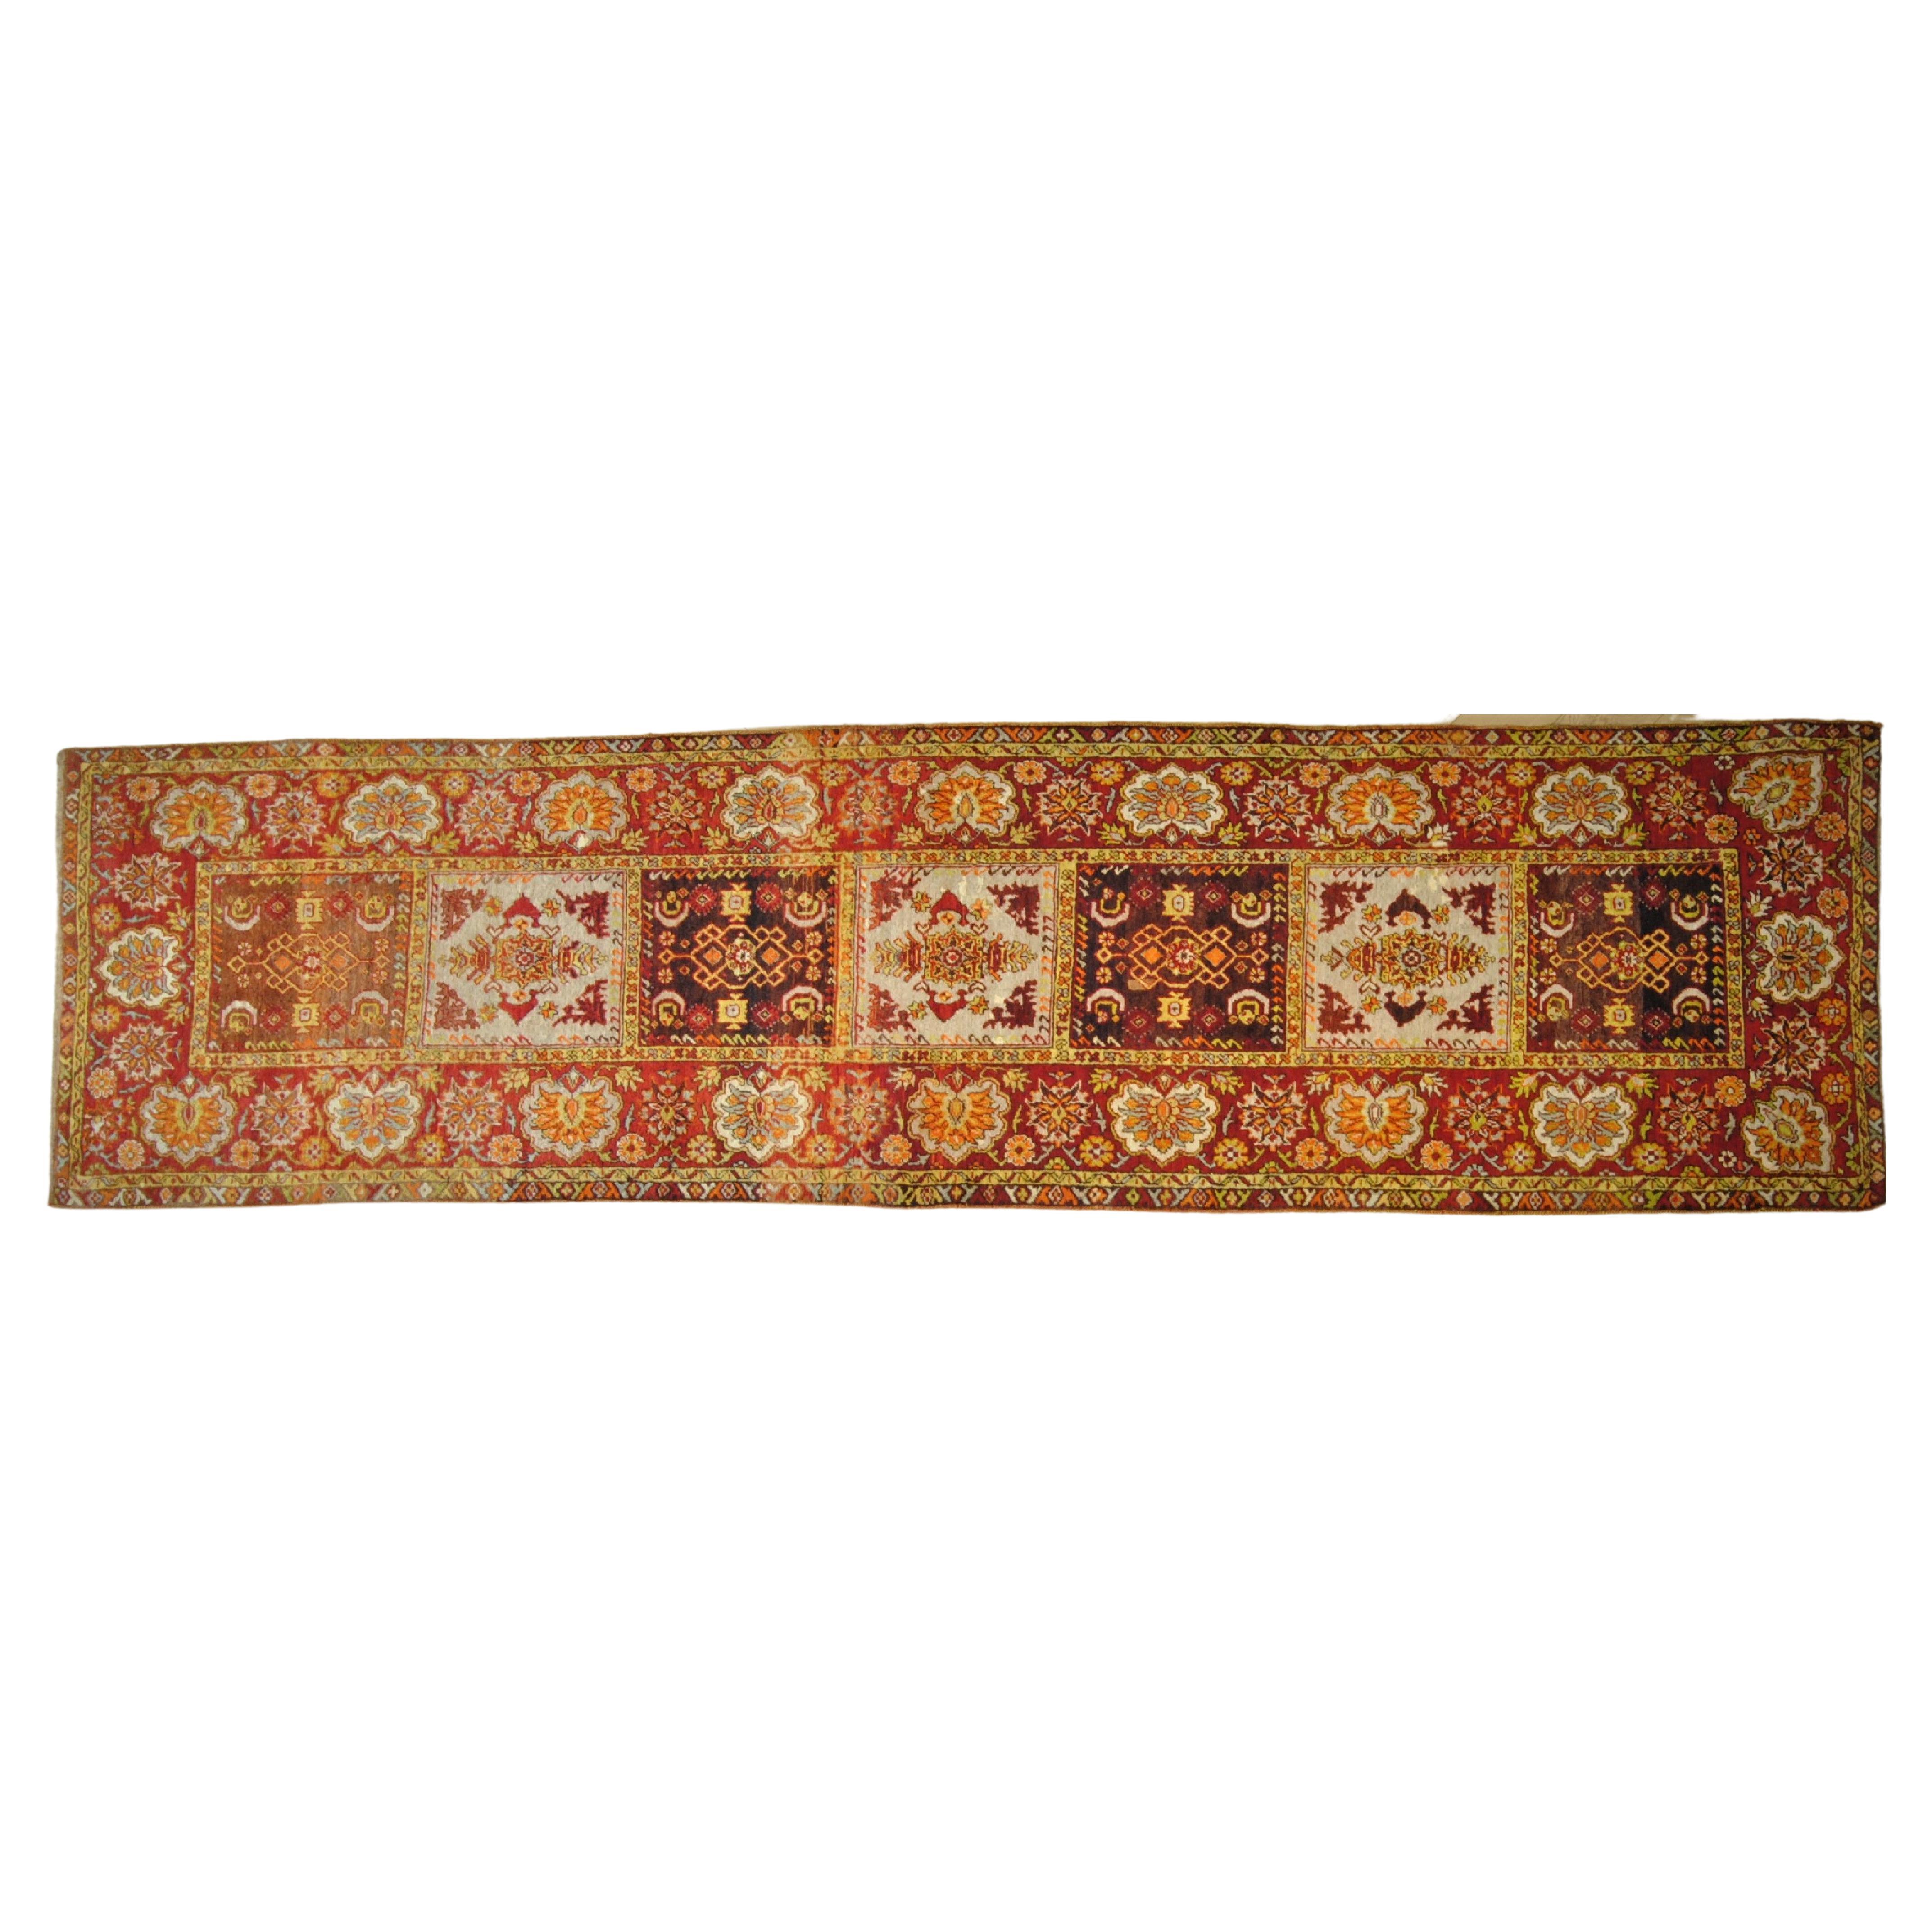 20th Century Anatolian Earth Colours Brown Red Yellow Anatolian Rug, ca 1920 For Sale